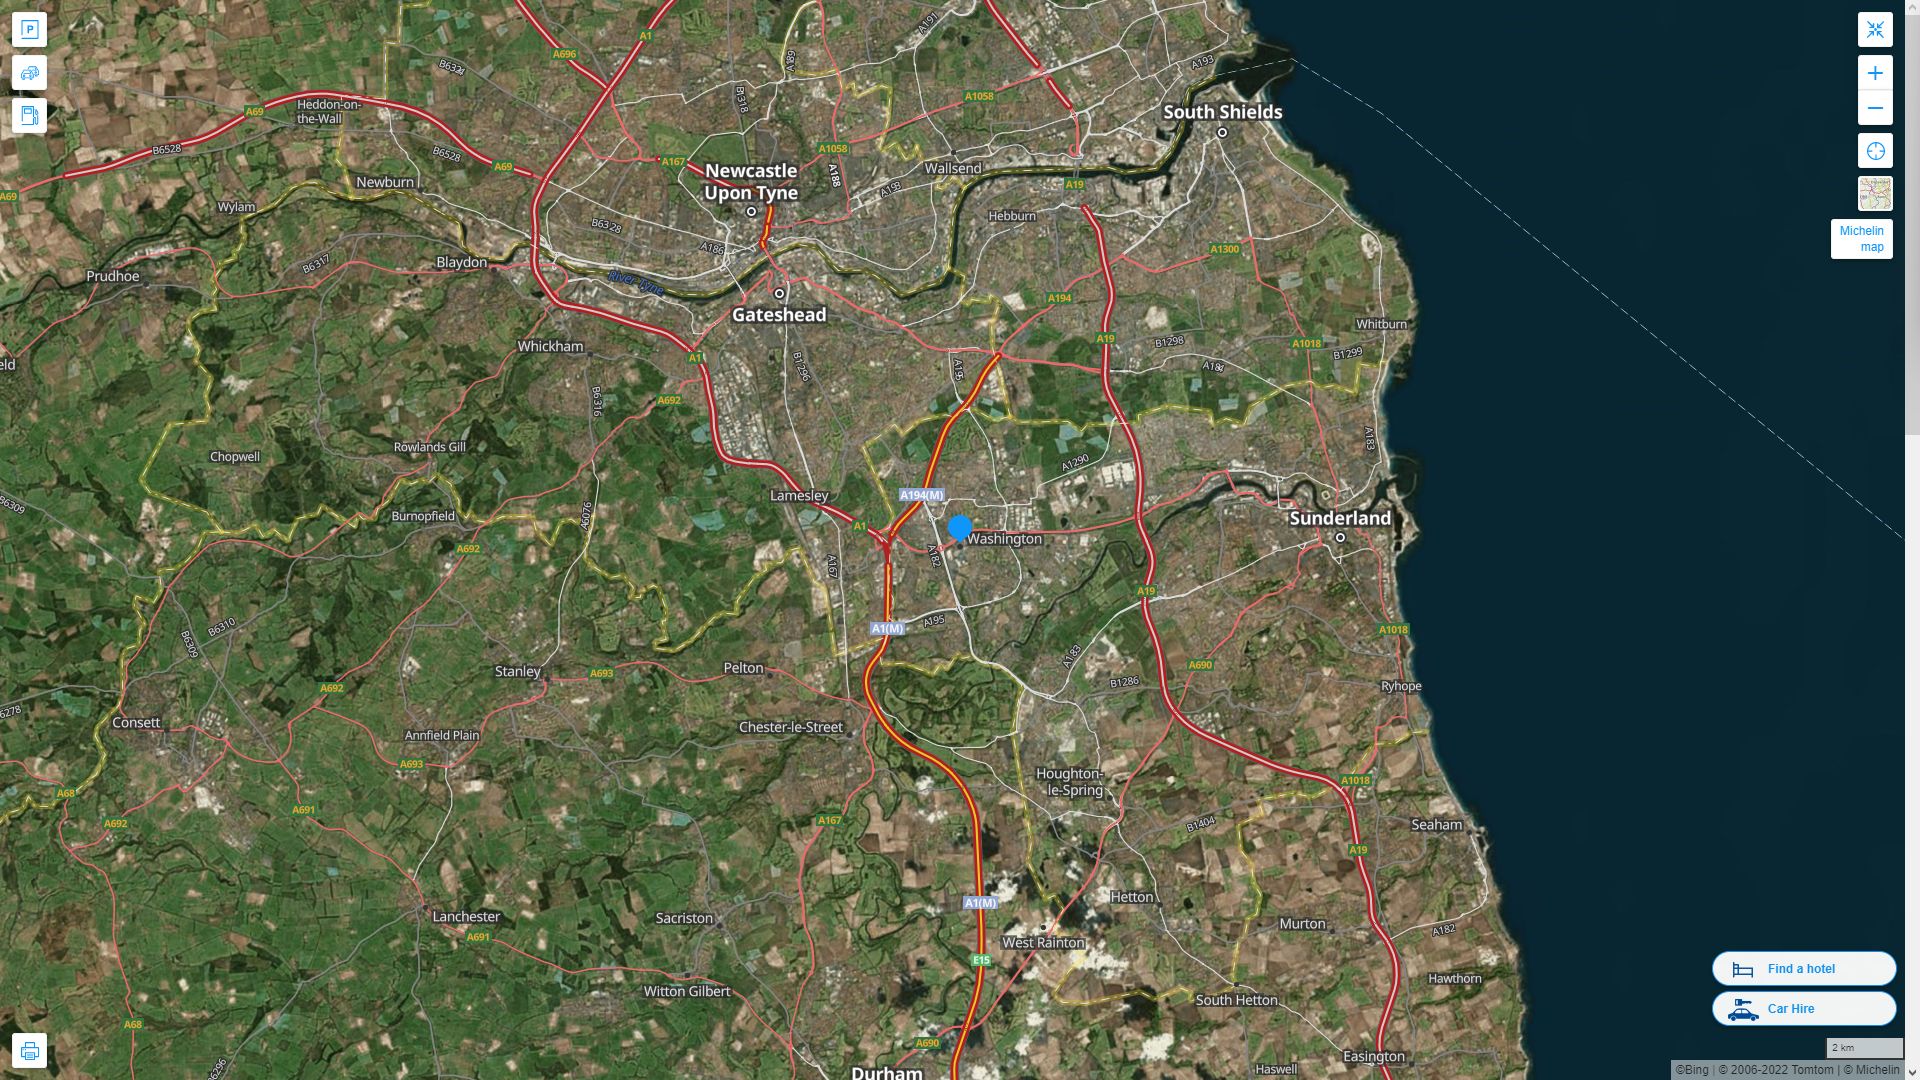 Washington UK Highway and Road Map with Satellite View